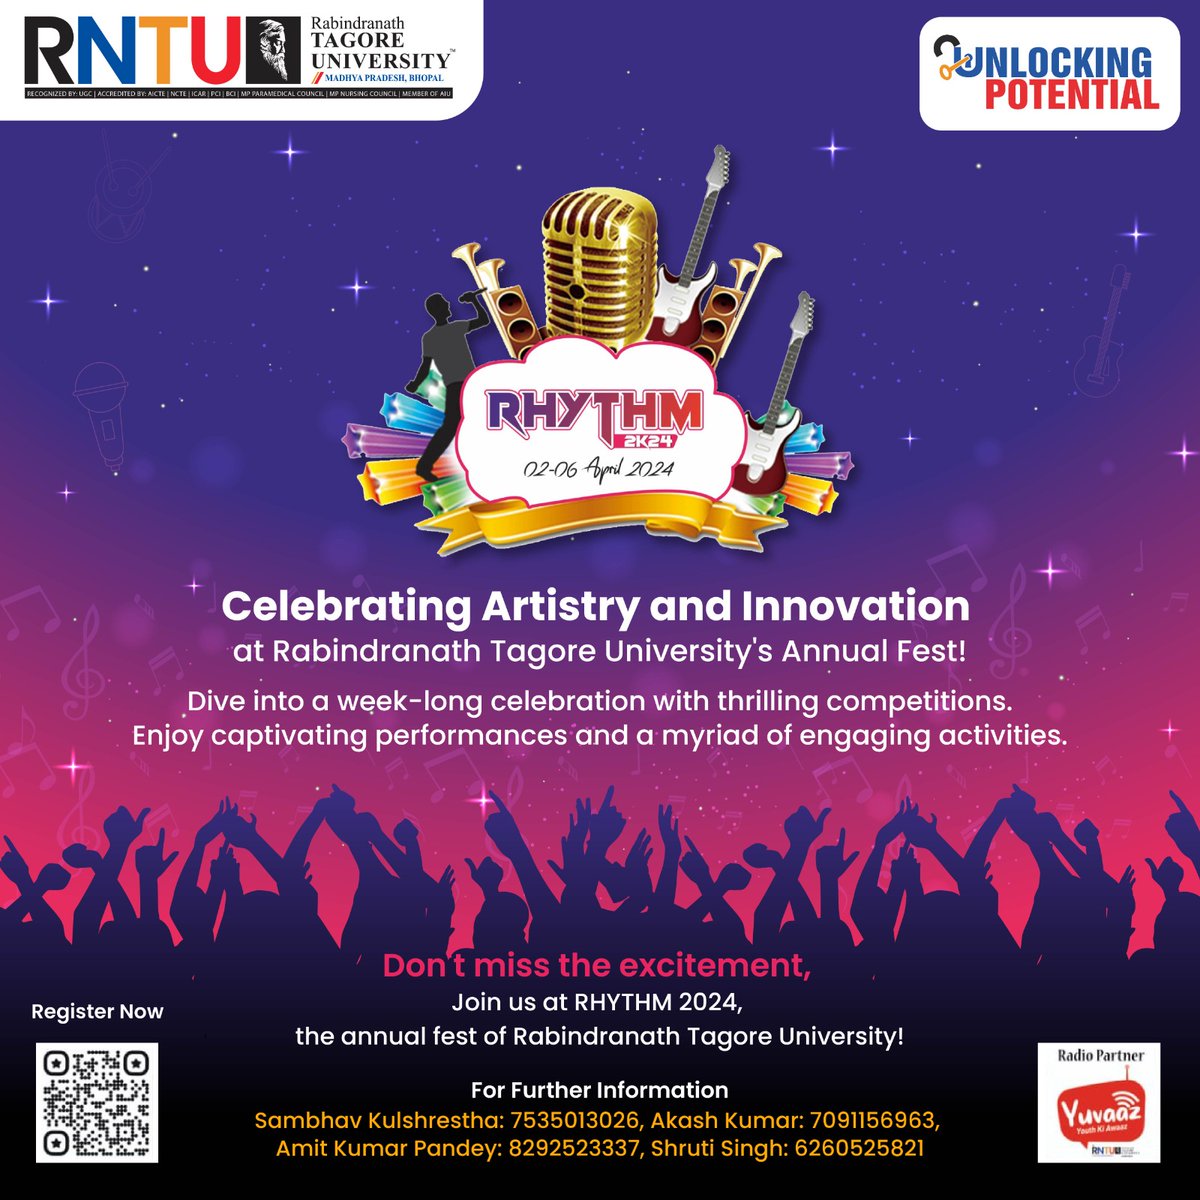 Experience the magic of creativity and innovation at RHYTHM 2024, Rabindranath Tagore University's annual fest! Dive into a week filled with thrilling competitions, captivating performances, and engaging activities.

#RHYTHM2024 #RNTUAnnualFest #ArtistryAndInnovation